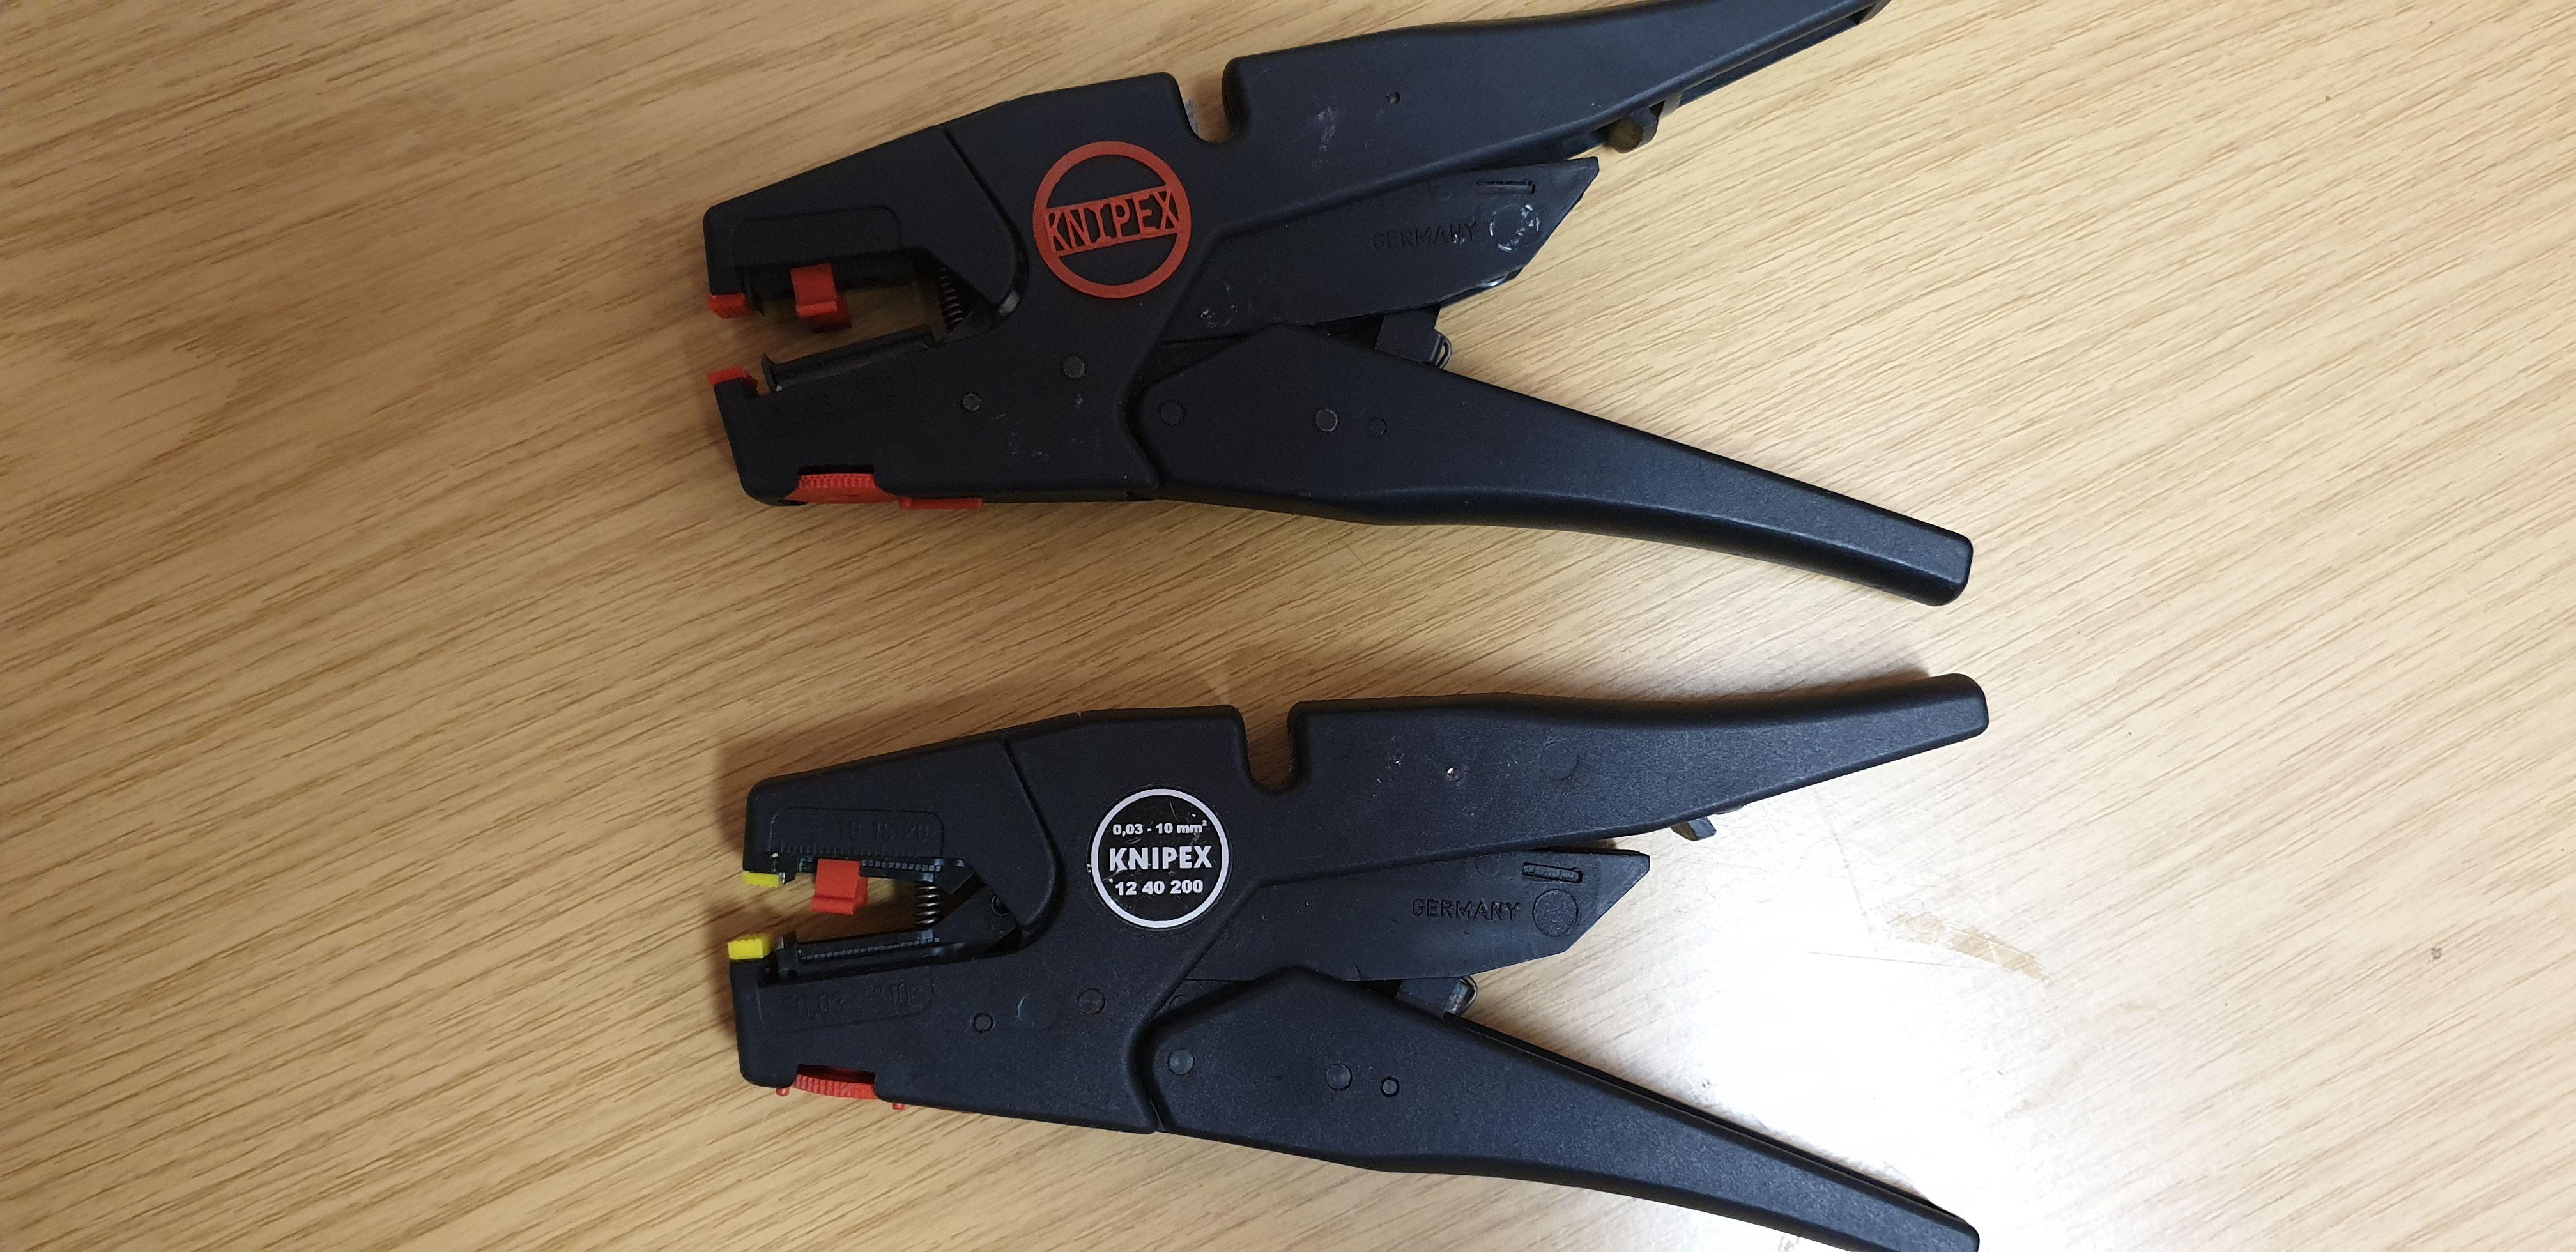 Knipex Logo - Knipex Logo for wire stripper tool by Bliziyo - Thingiverse